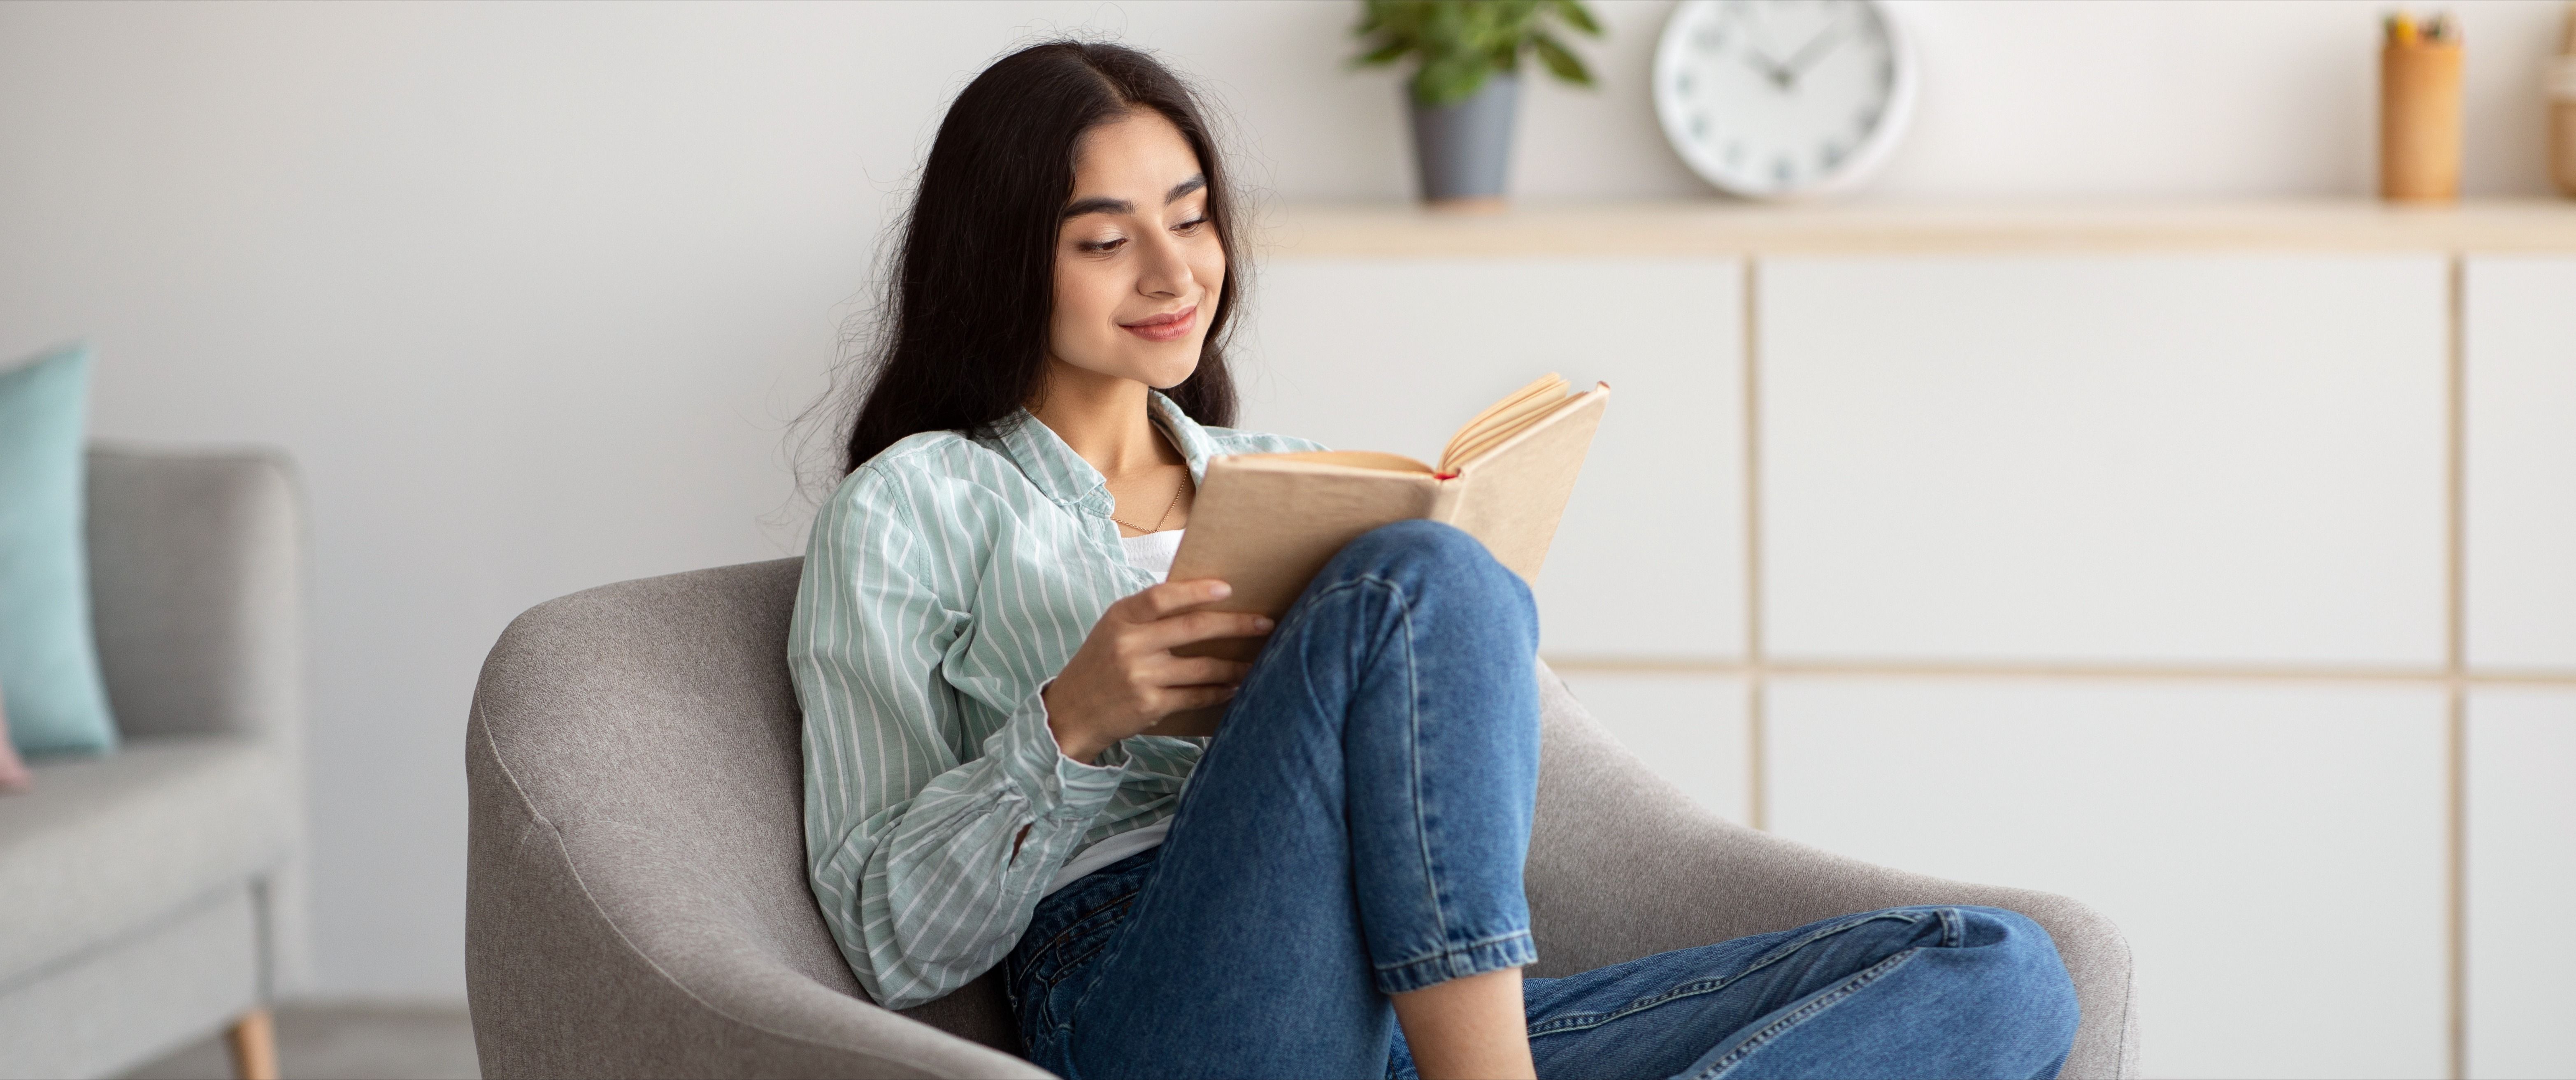 Millennial Indian woman sitting in cozy armchair with open book indoors.